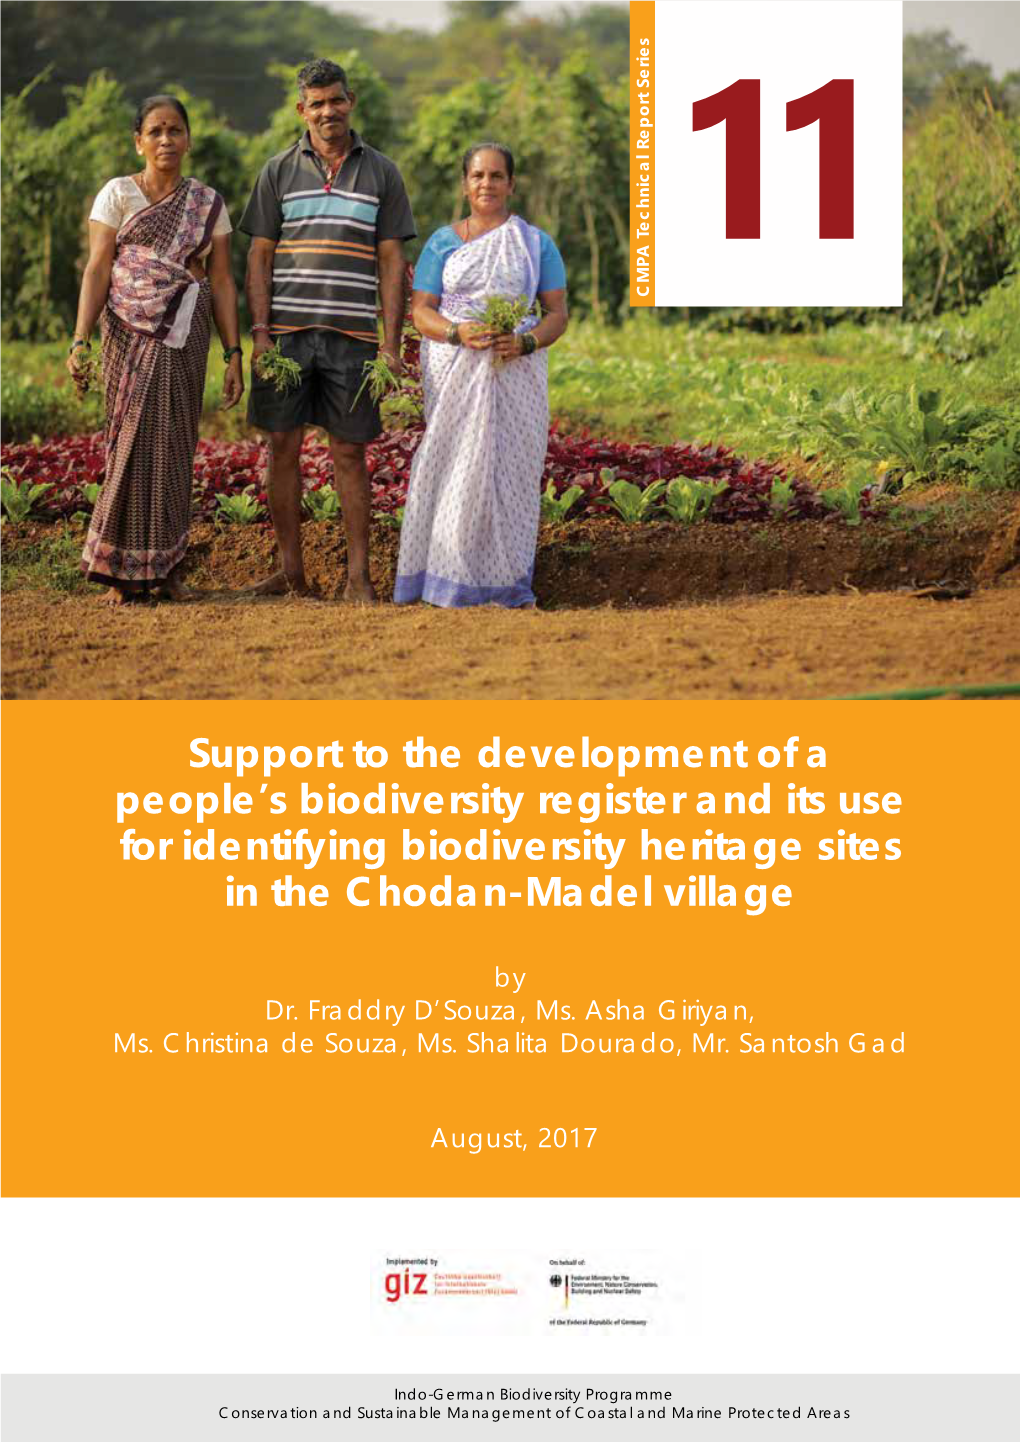 Support to the Development of a People's Biodiversity Register and Its Use for Identifying Biodiversity Heritage Sites In